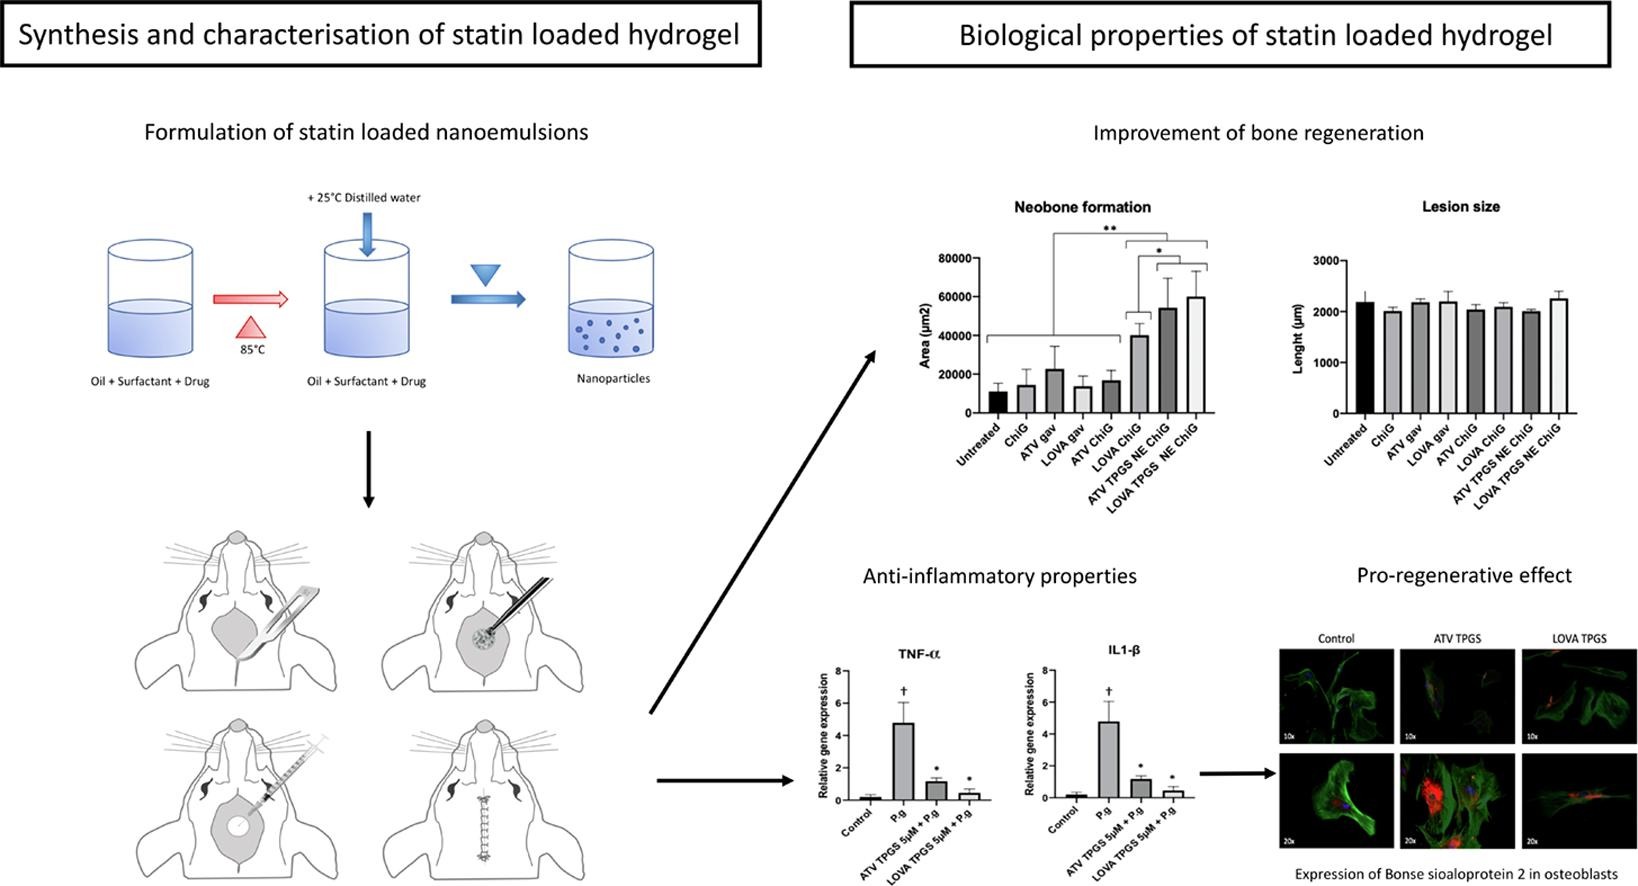 K. Development of a thermosensitive statin loaded chitosan-based hydrogel promoting bone healing